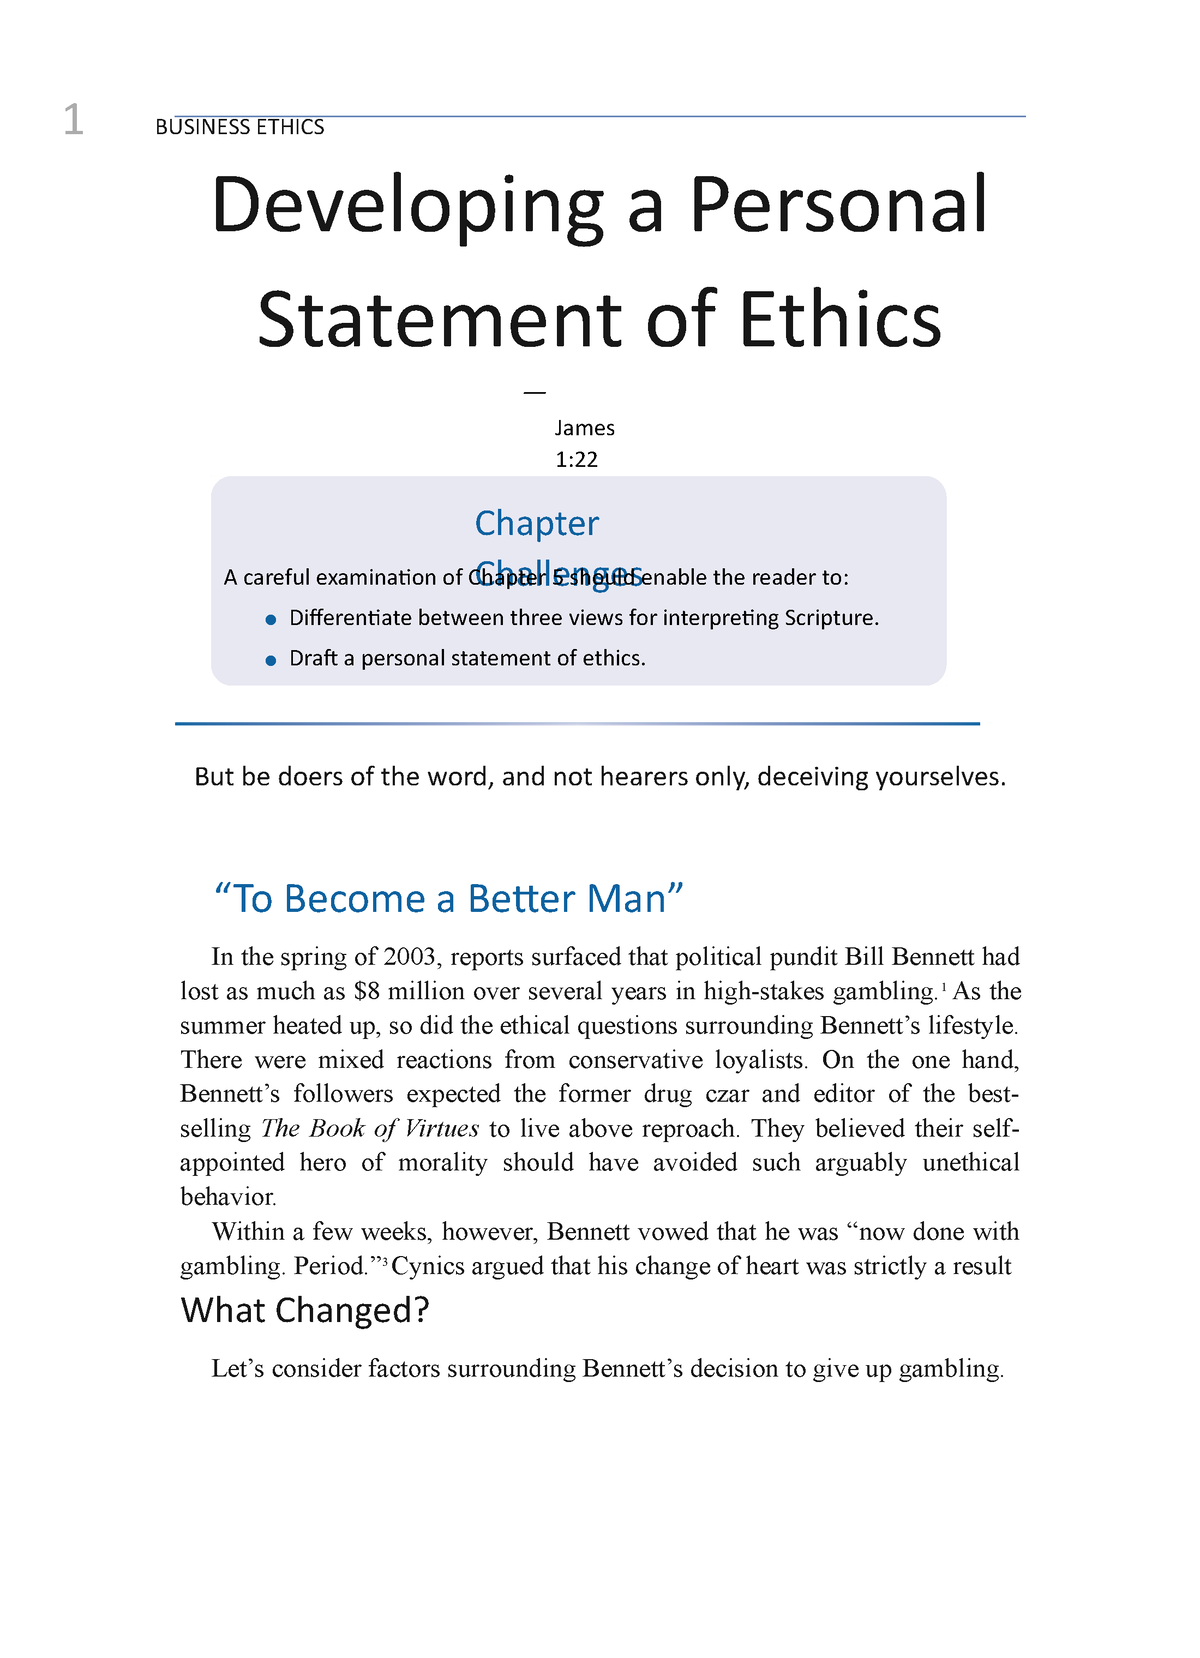 sample of a personal ethics statement